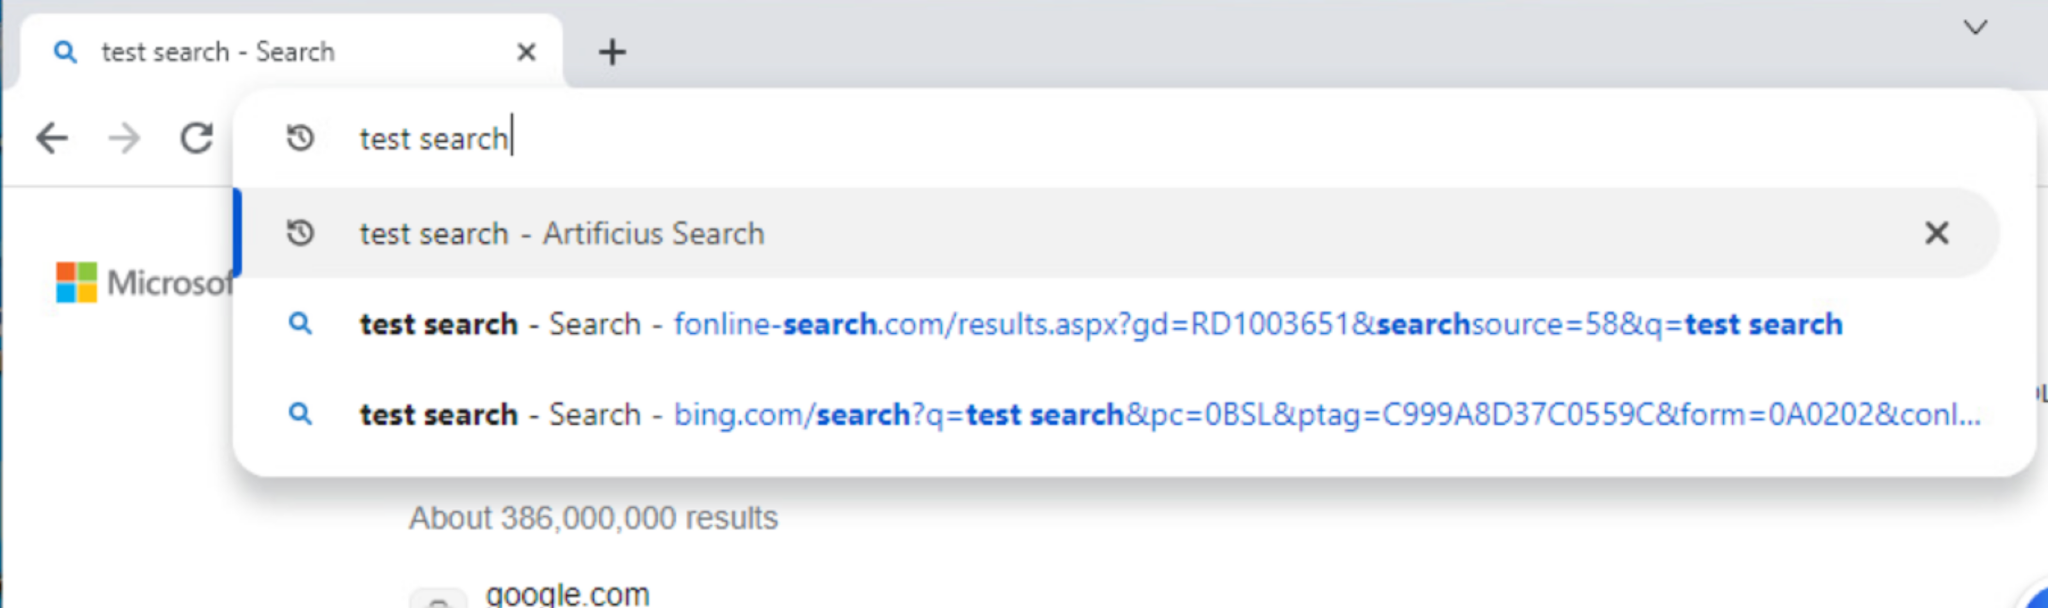 Image 10 is a screenshot of how the Artificius browser uses its own search engine when searching in the URL. 